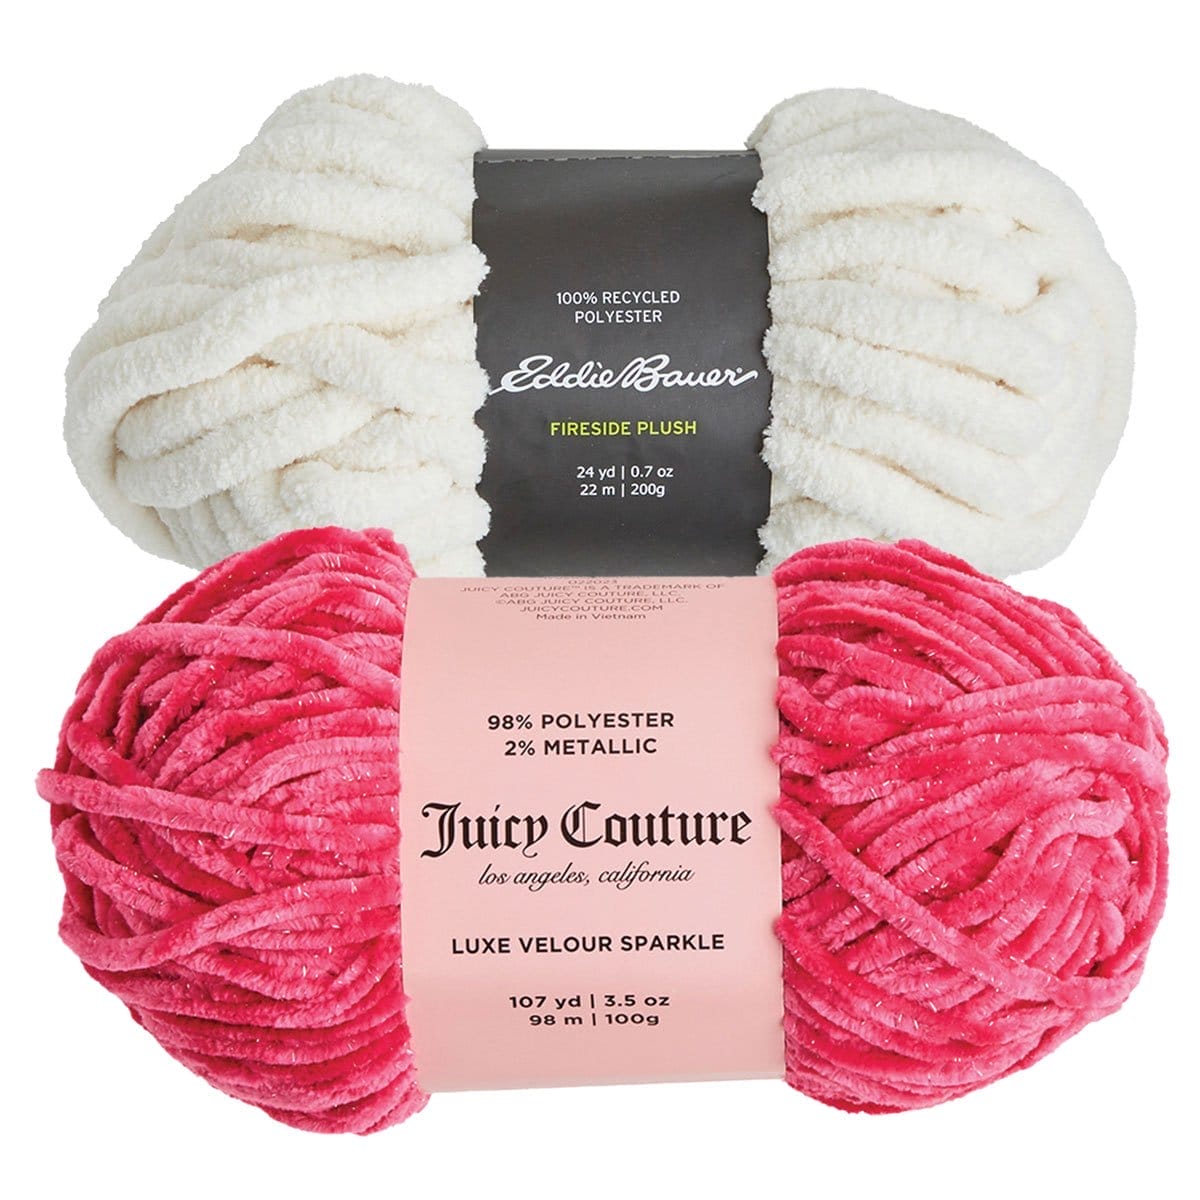 Juicy Couture Yarn